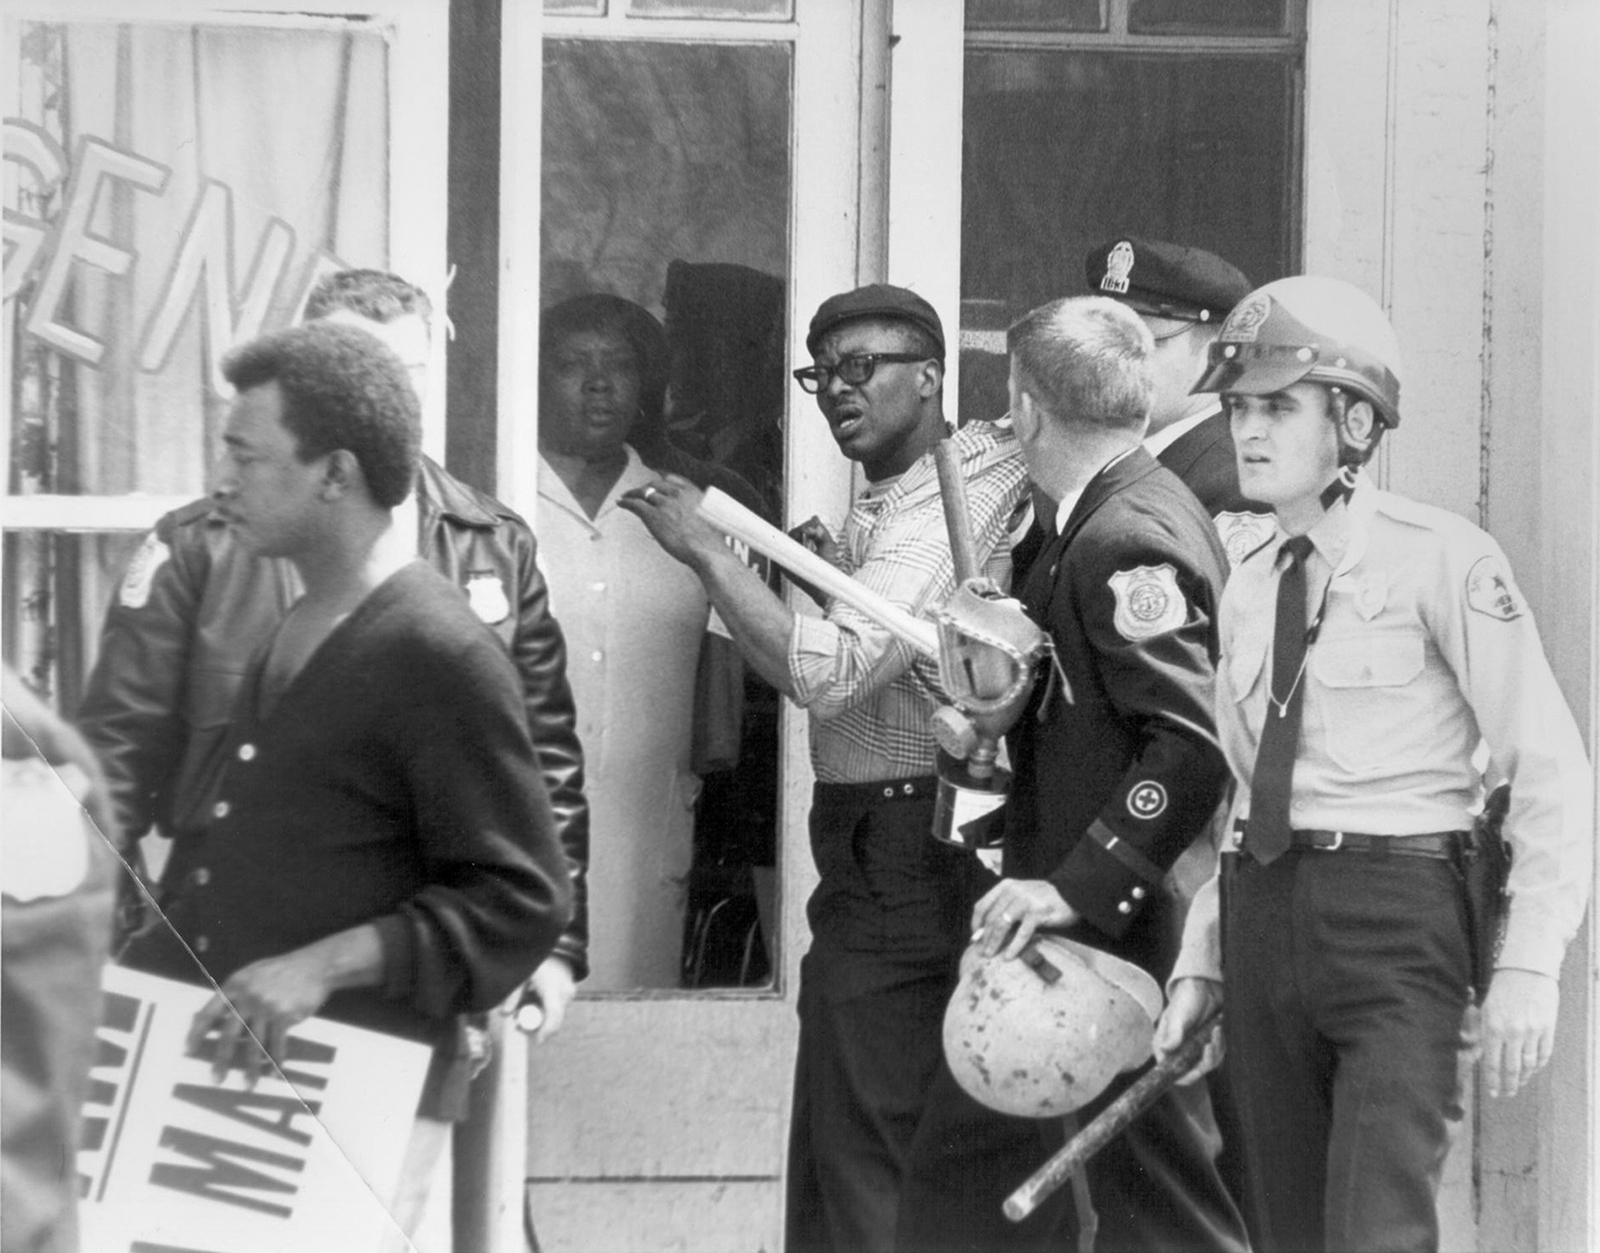 PHOTO: Police move in after violence broke out during the dignity march led by Martin Luther King Jr., in Memphis, Tenn., March 28, 1968.